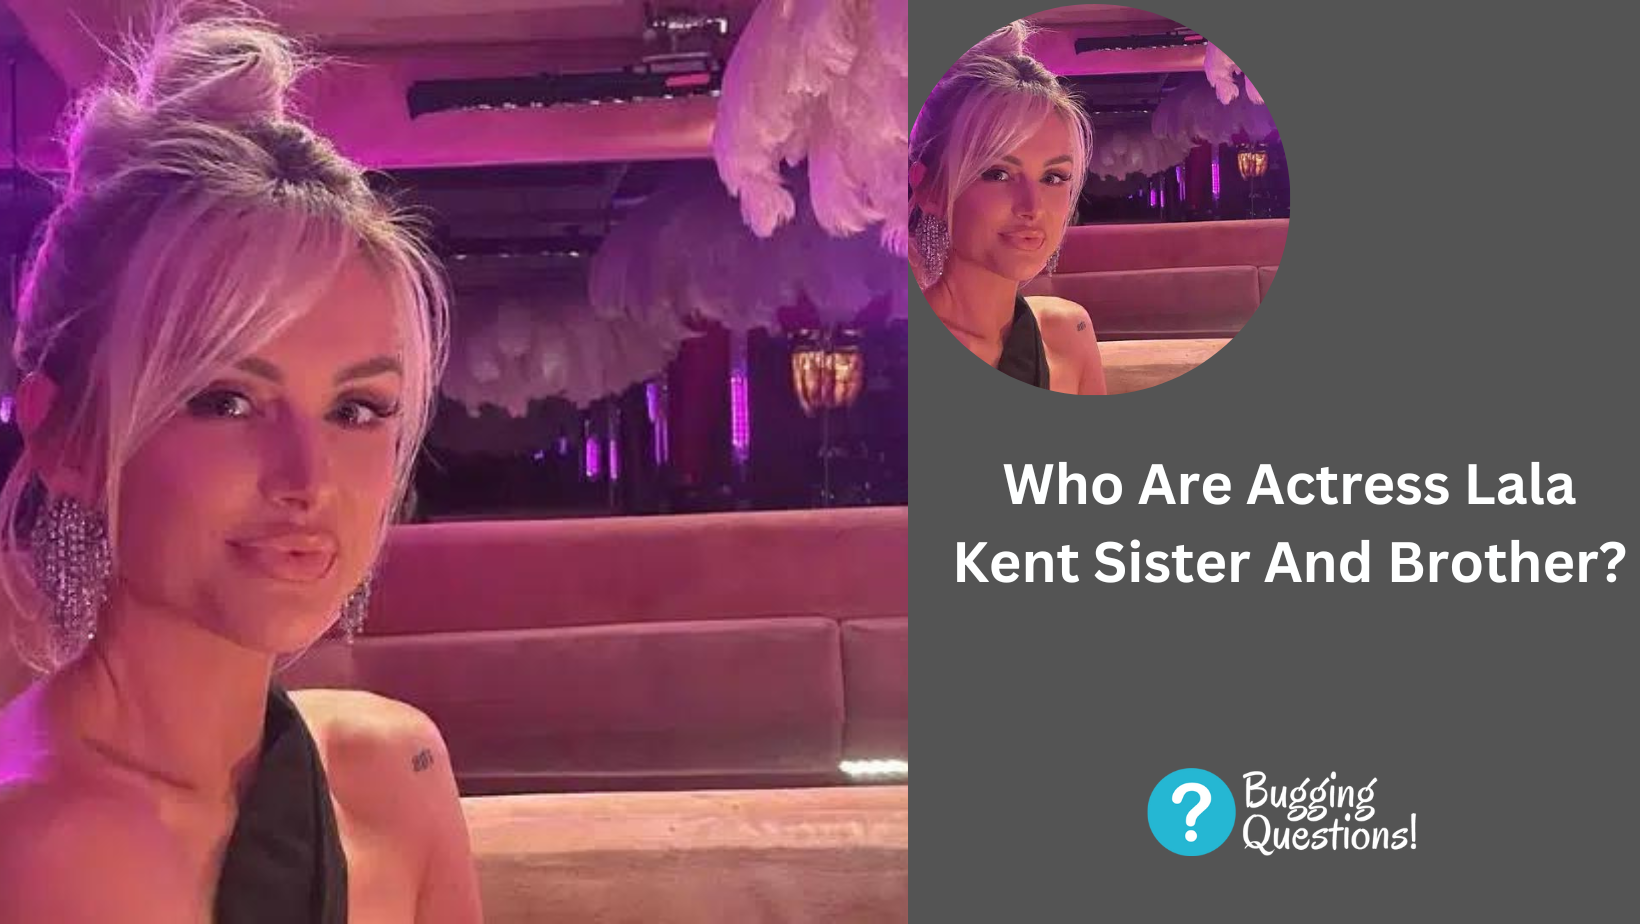 Who Are Actress Lala Kent Sister And Brother?